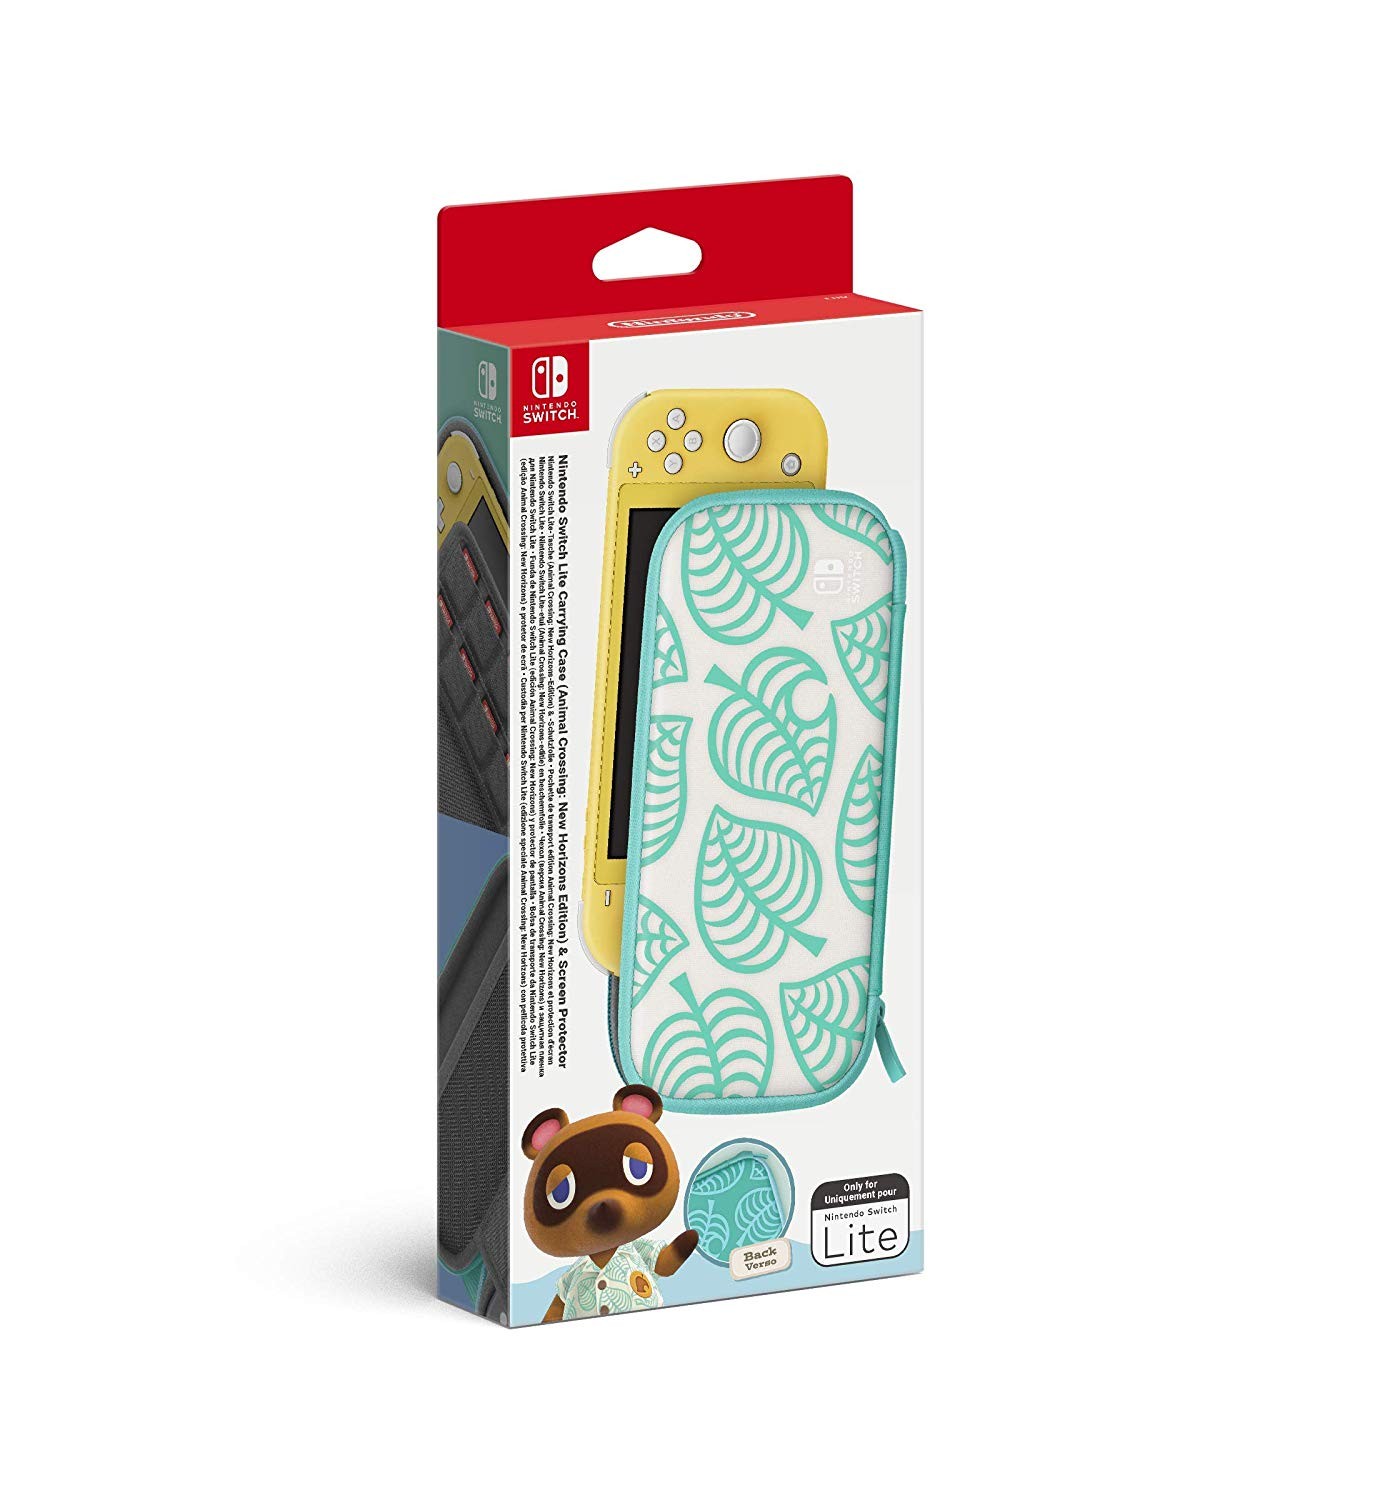 Nintendo Switch Lite Carrying Case & Screen Protector Animal Crossing Edition